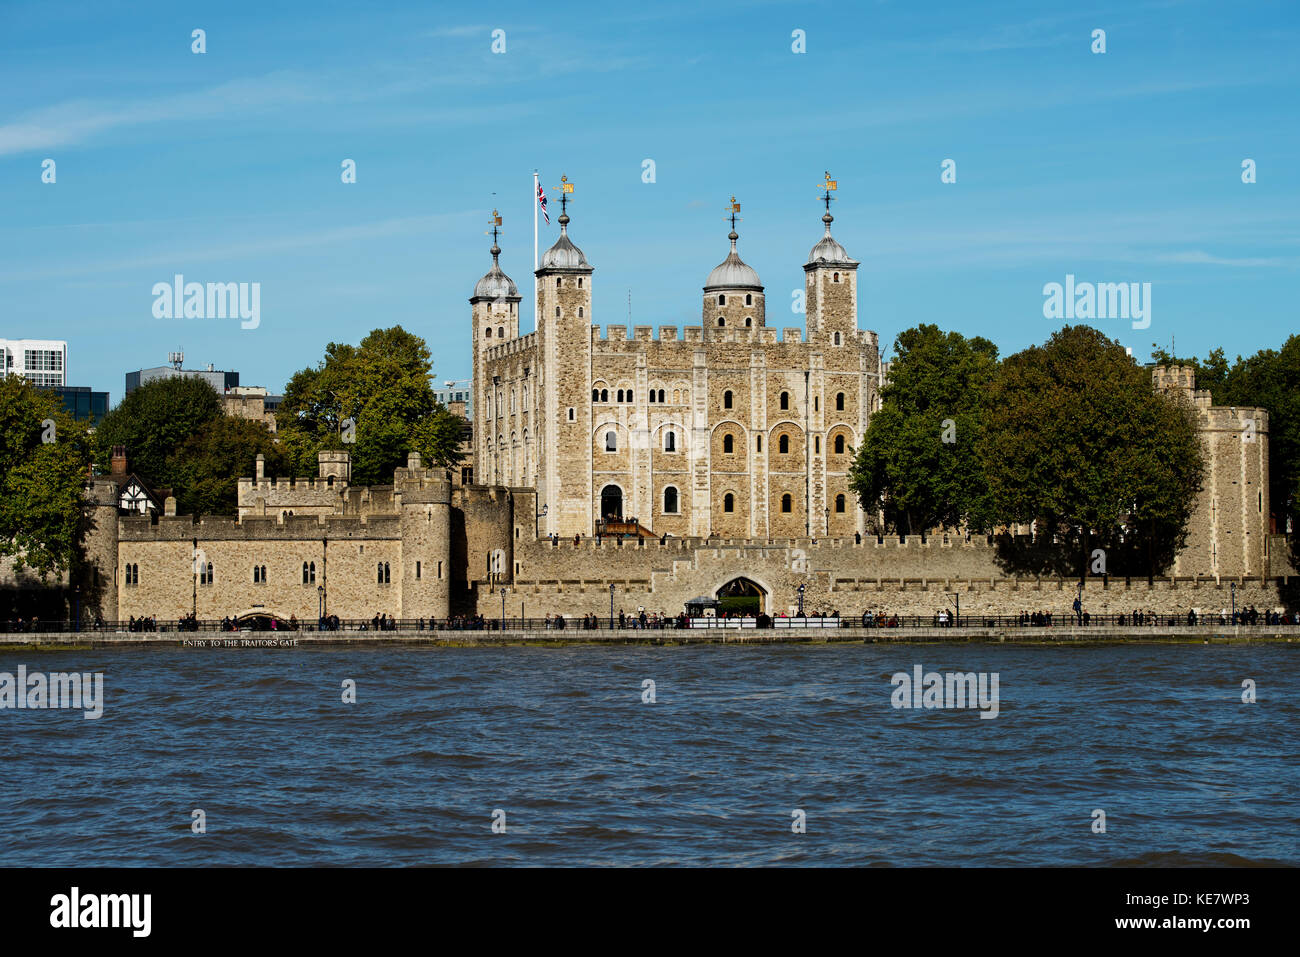 Tower of London with City of London Backdrop, London England. Oct 2017 The Tower of London, officially Her Majesty's Royal Palace and Fortress of the  Stock Photo